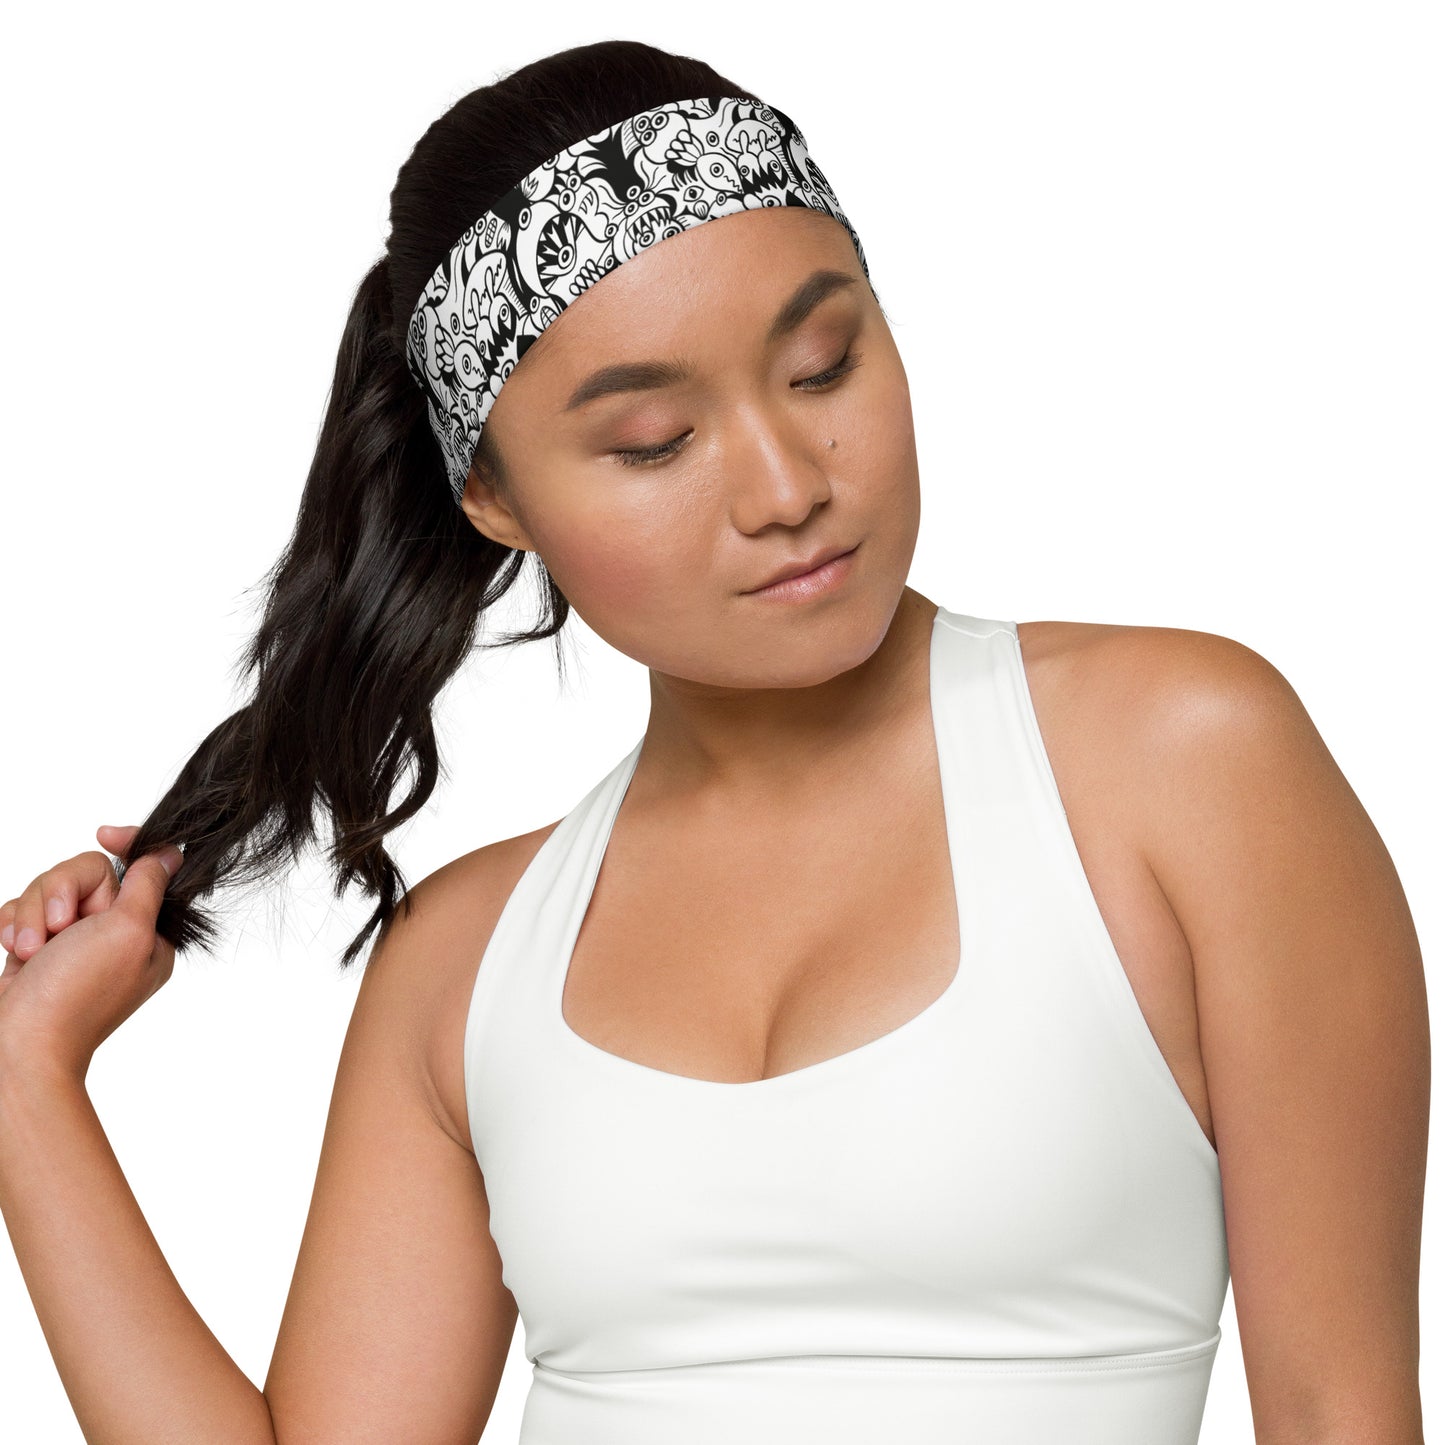 Nice woman wearing Headband All over printed with Black and white cool doodles art